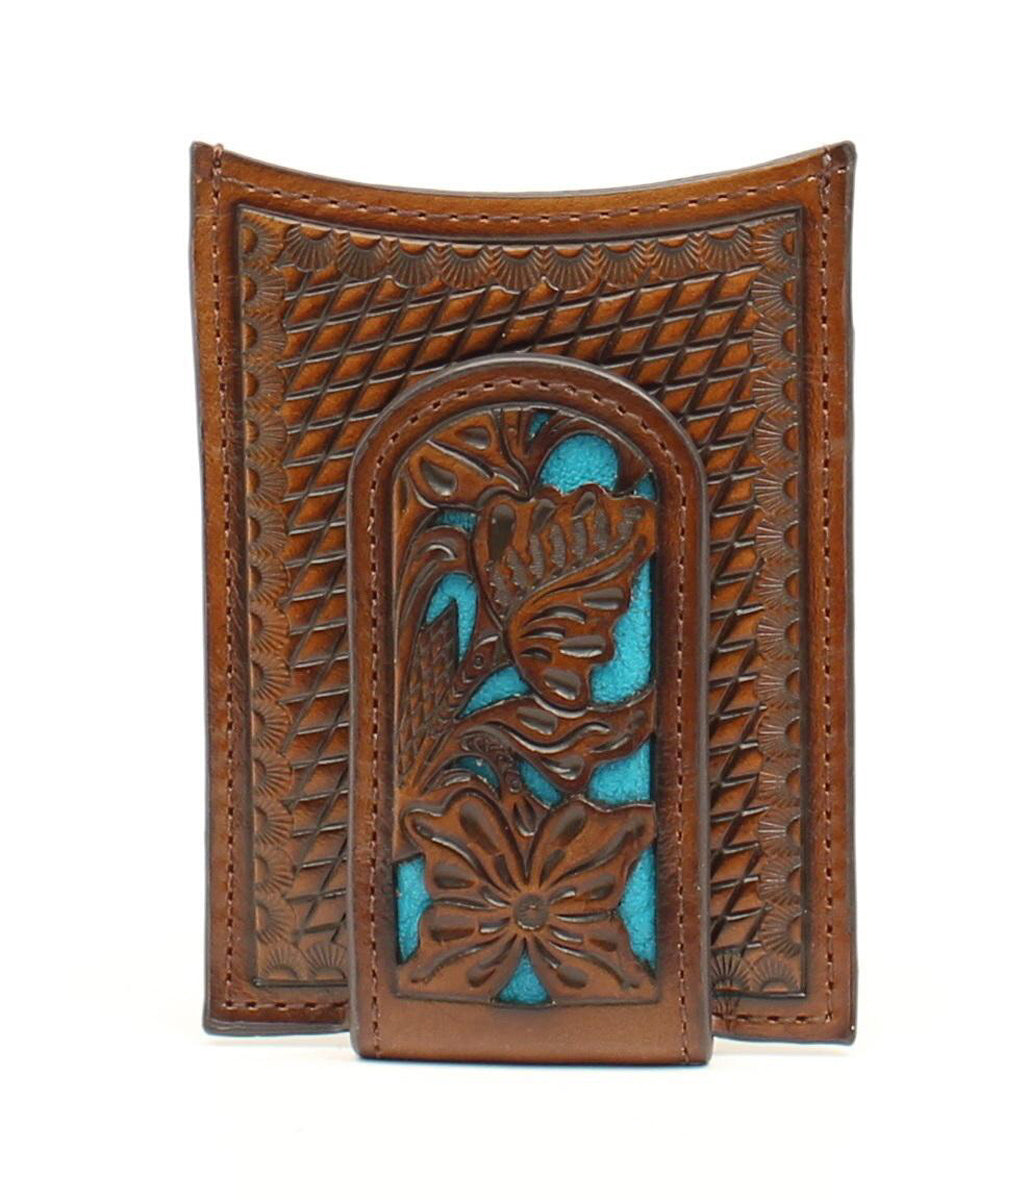 NOCONA FLORAL TURQUOISE TOOLED MONEY CLIP